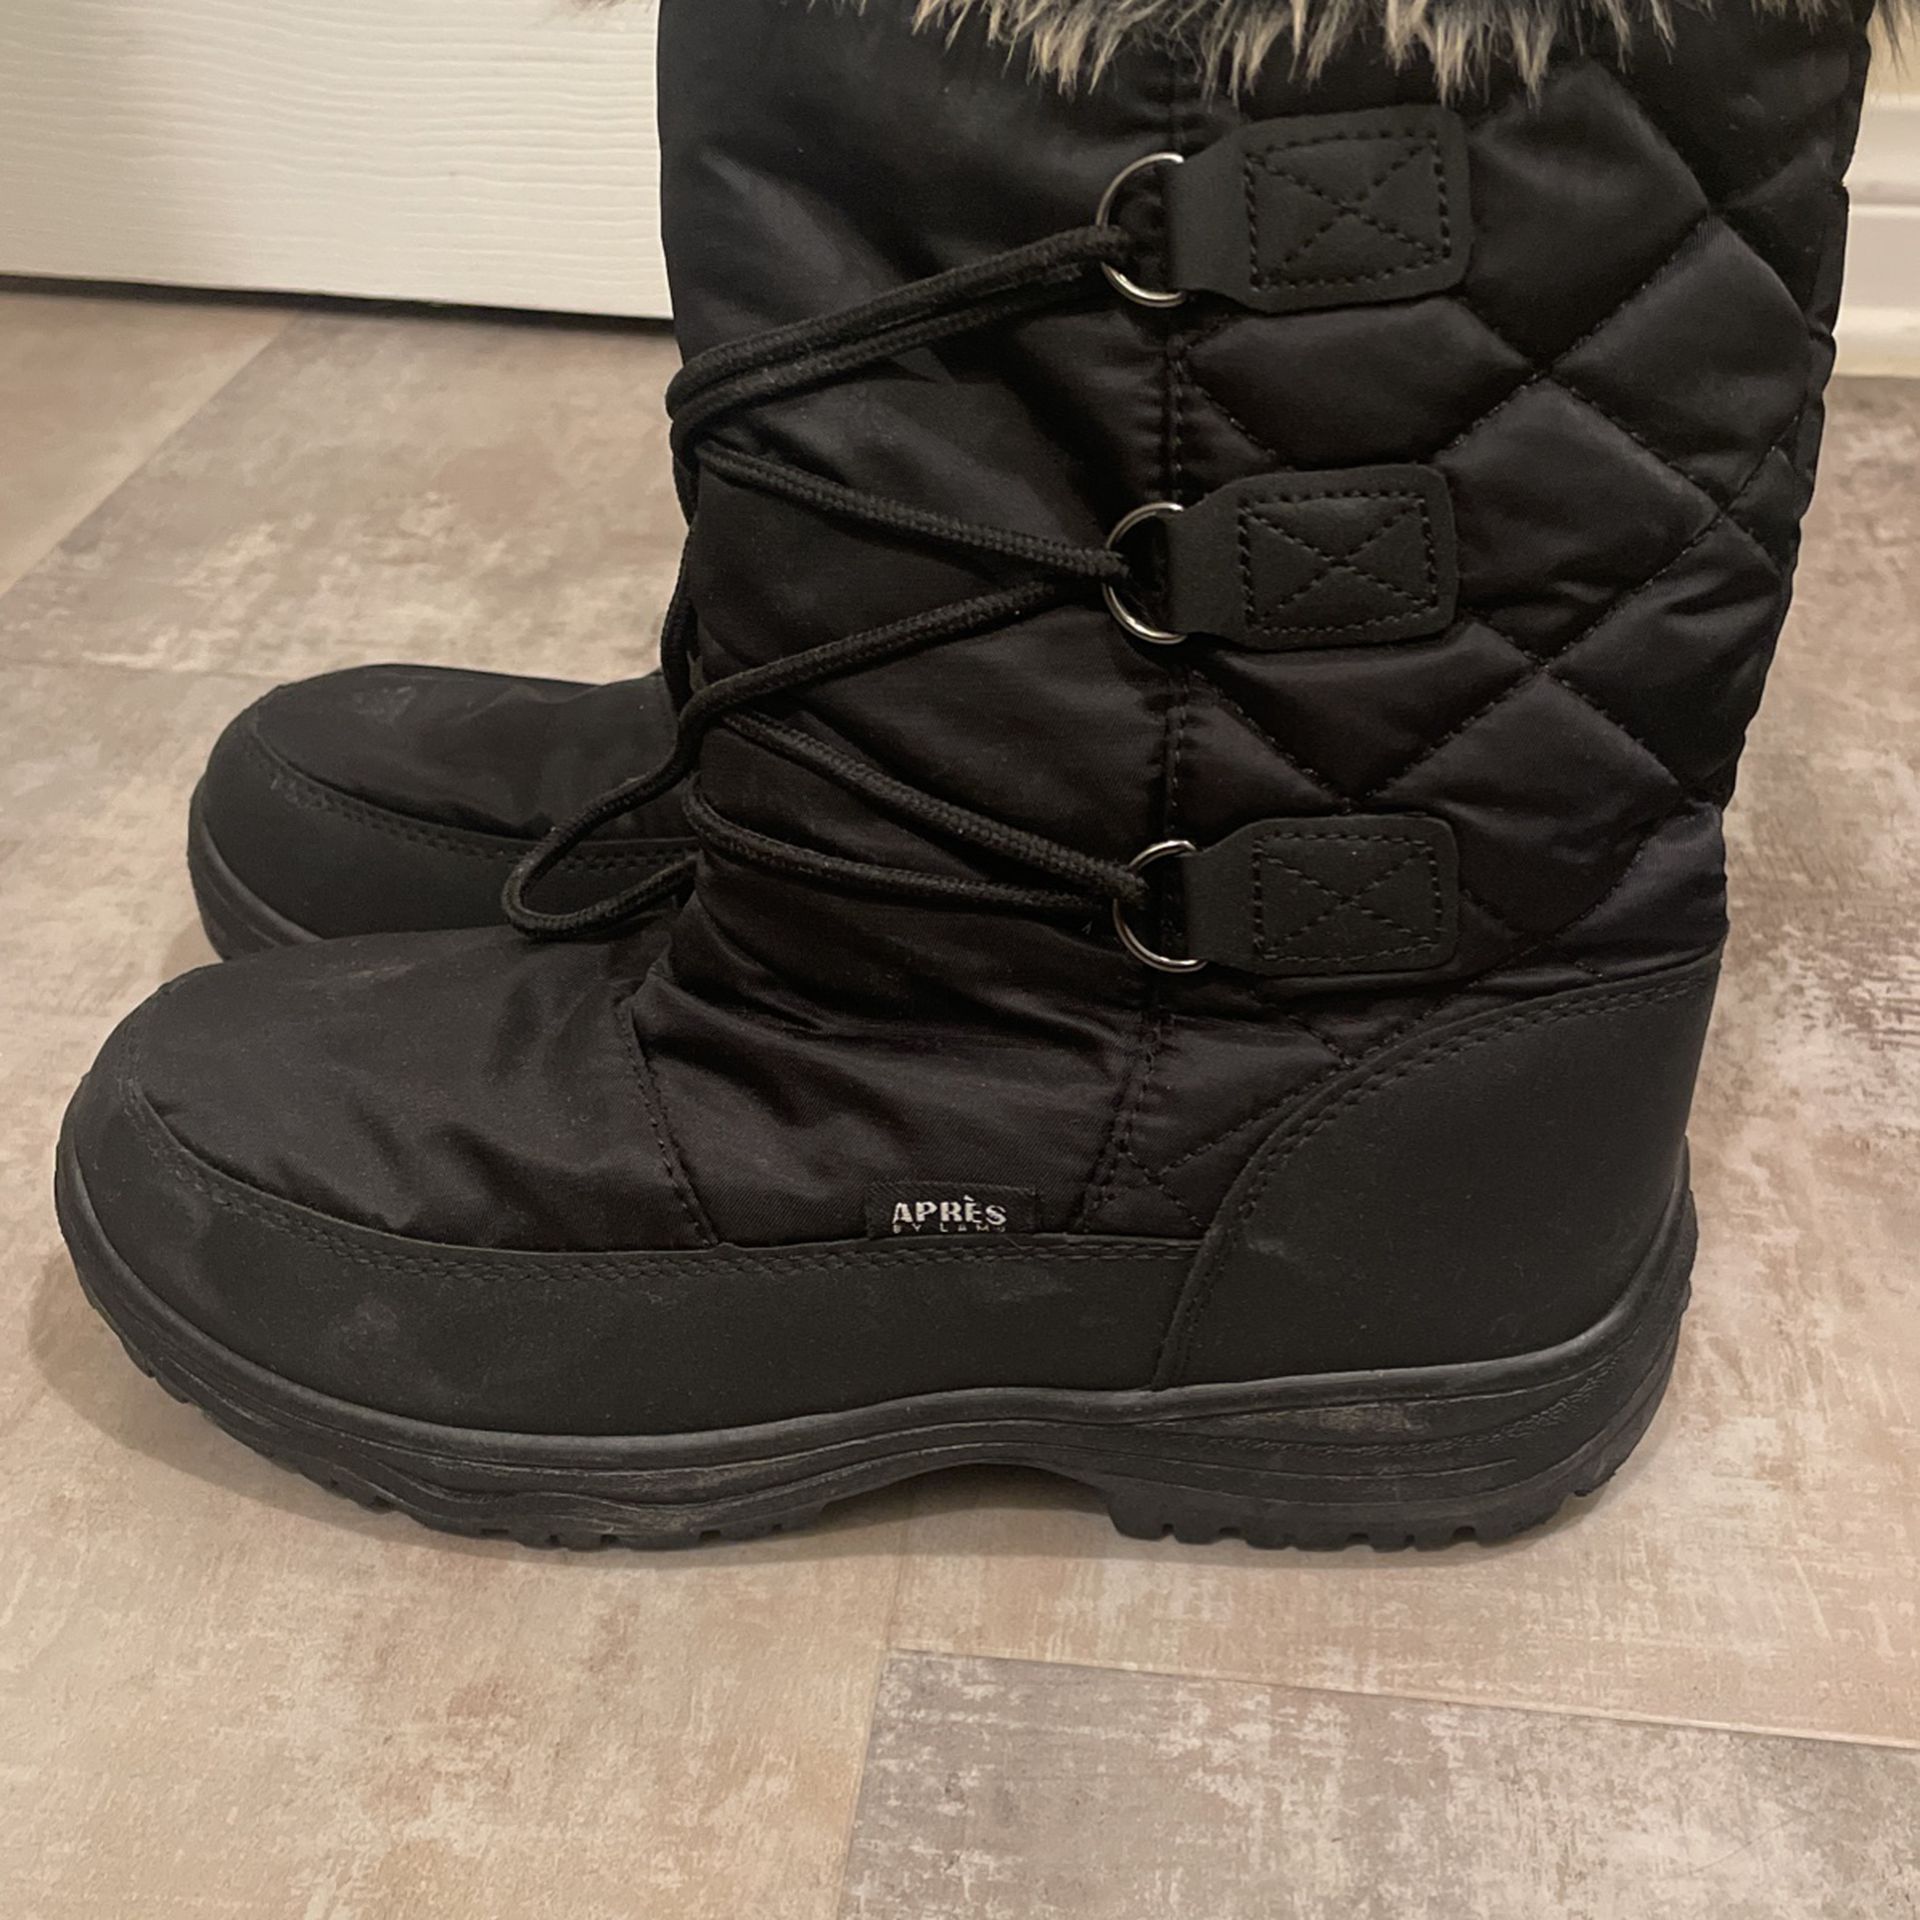 Woman’s Snow Boots Size:9